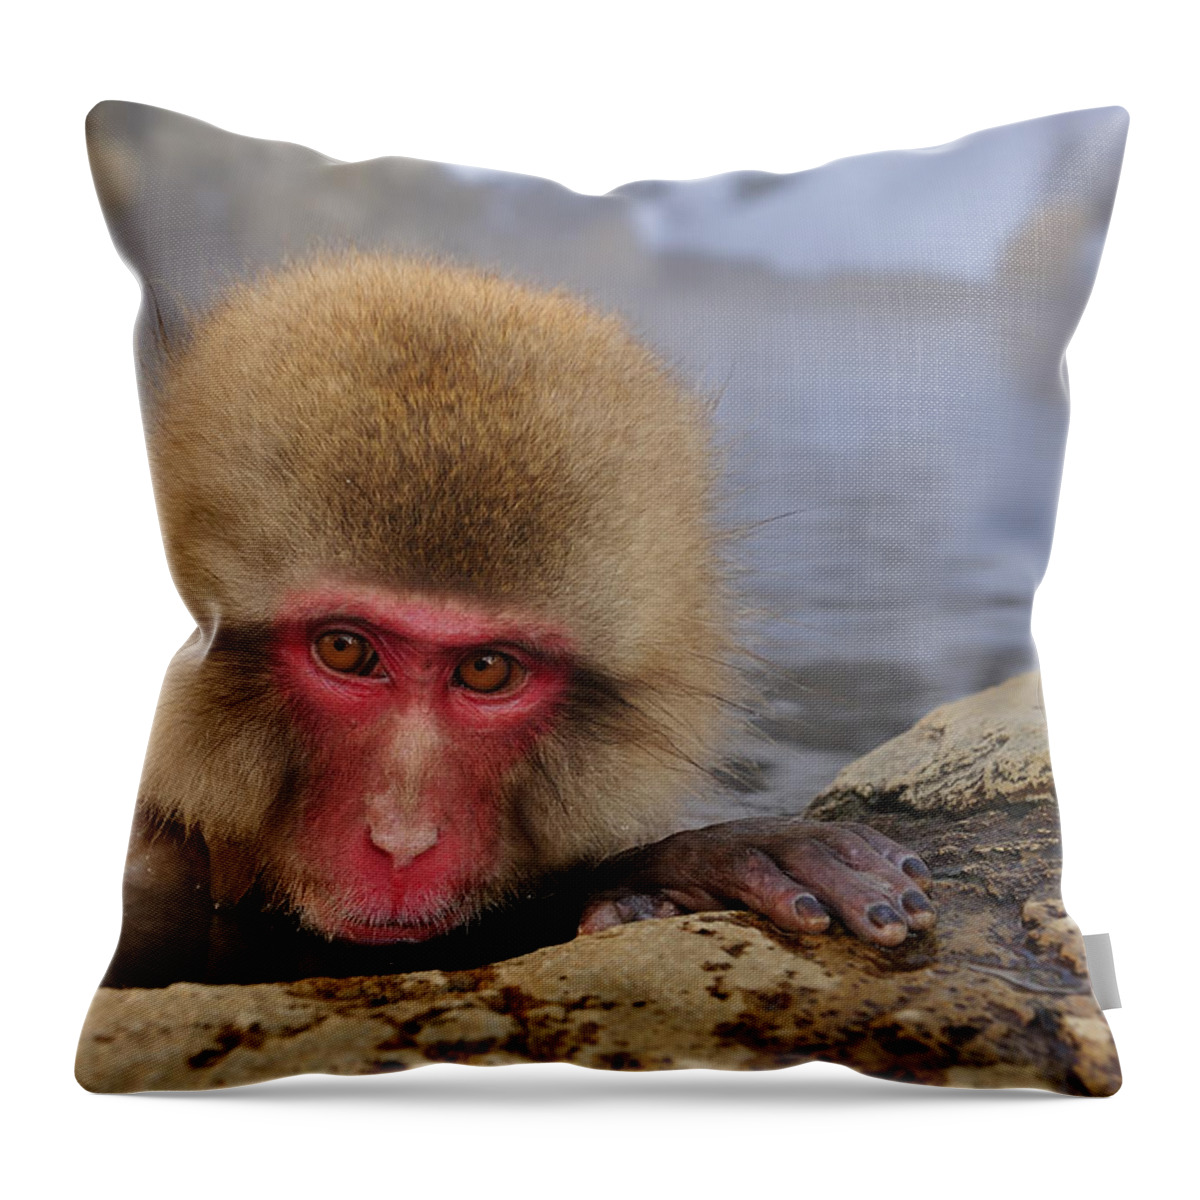 Thomas Marent Throw Pillow featuring the photograph Japanese Macaque In Hot Spring #2 by Thomas Marent